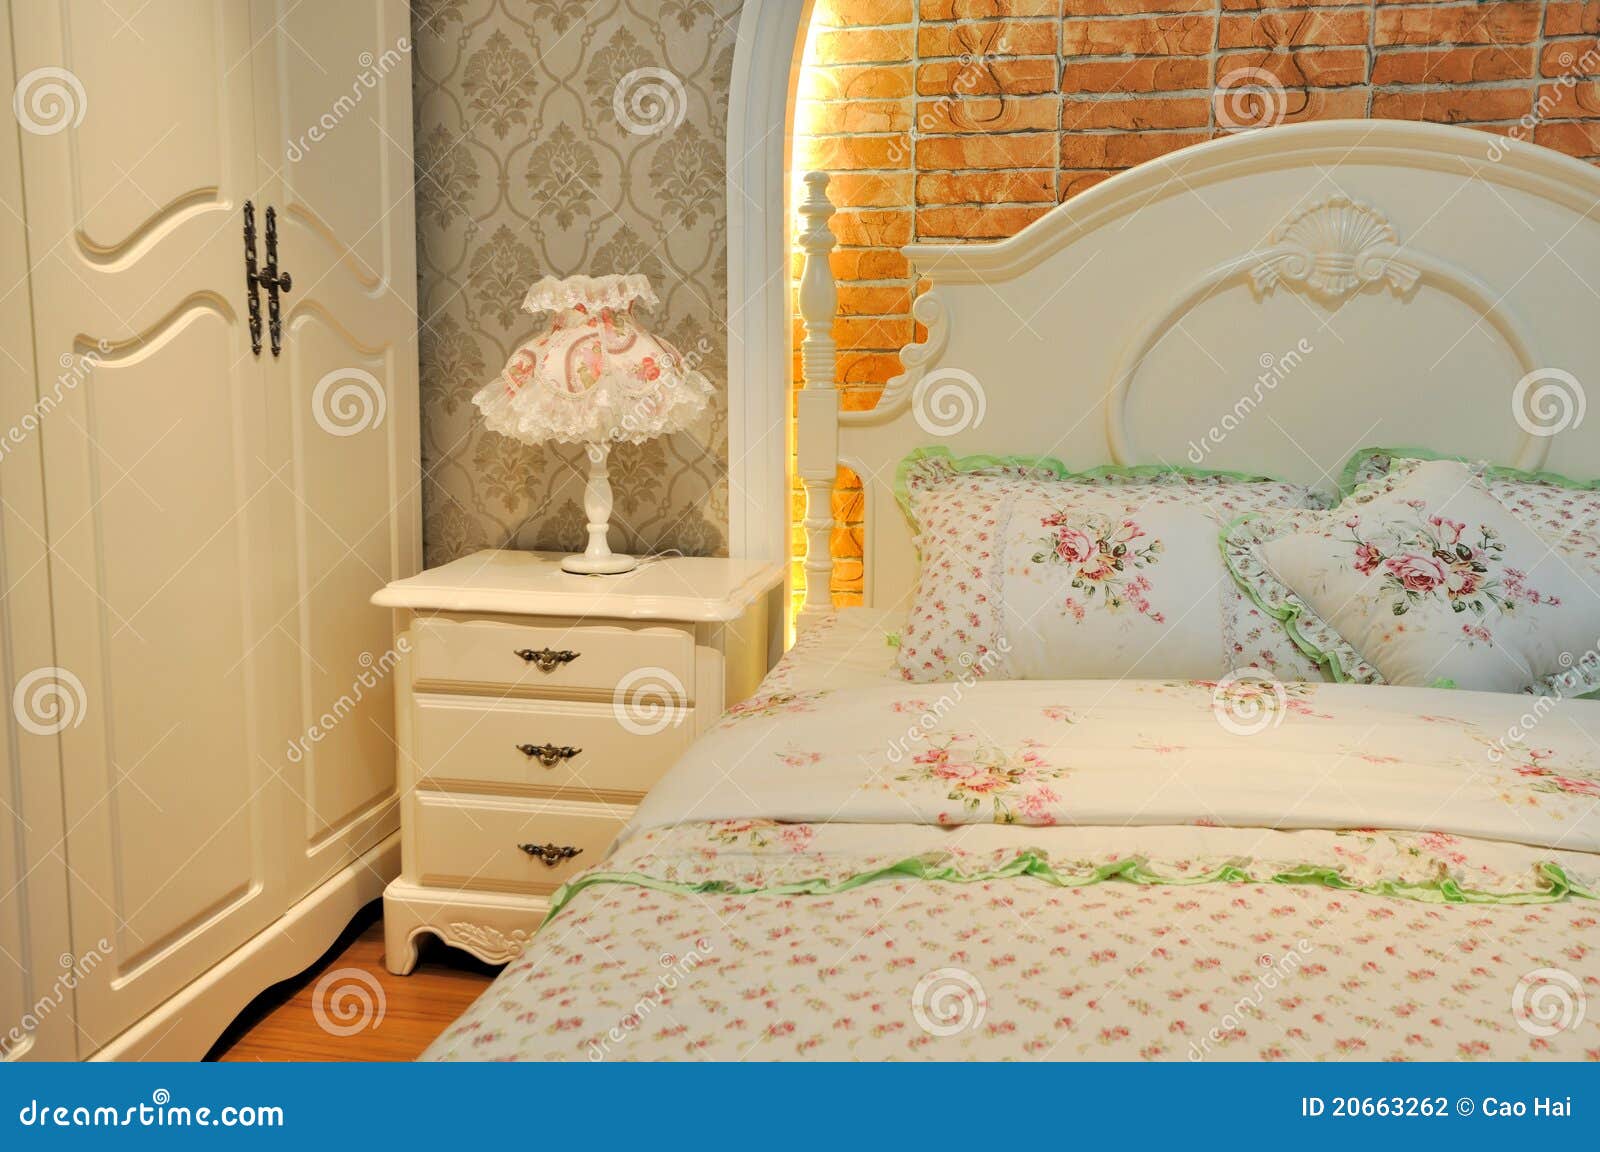 flowery and lighting color bedding room